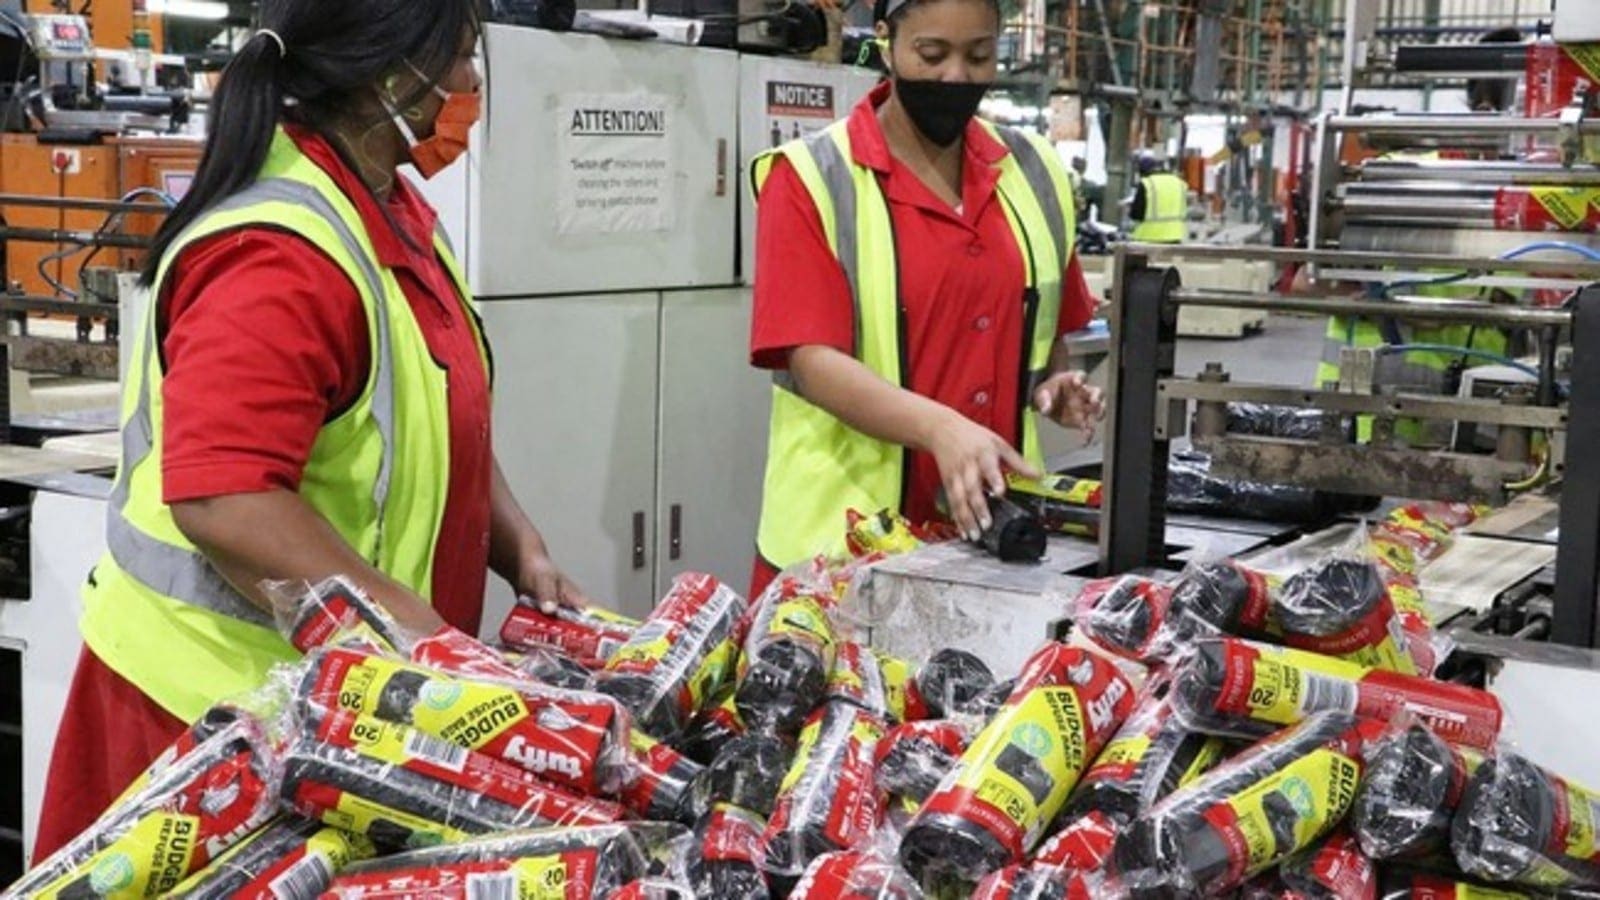 South Africa injected US$141.2m in plastic recycling in 2019 reducing CO2 emissions, quantity of waste